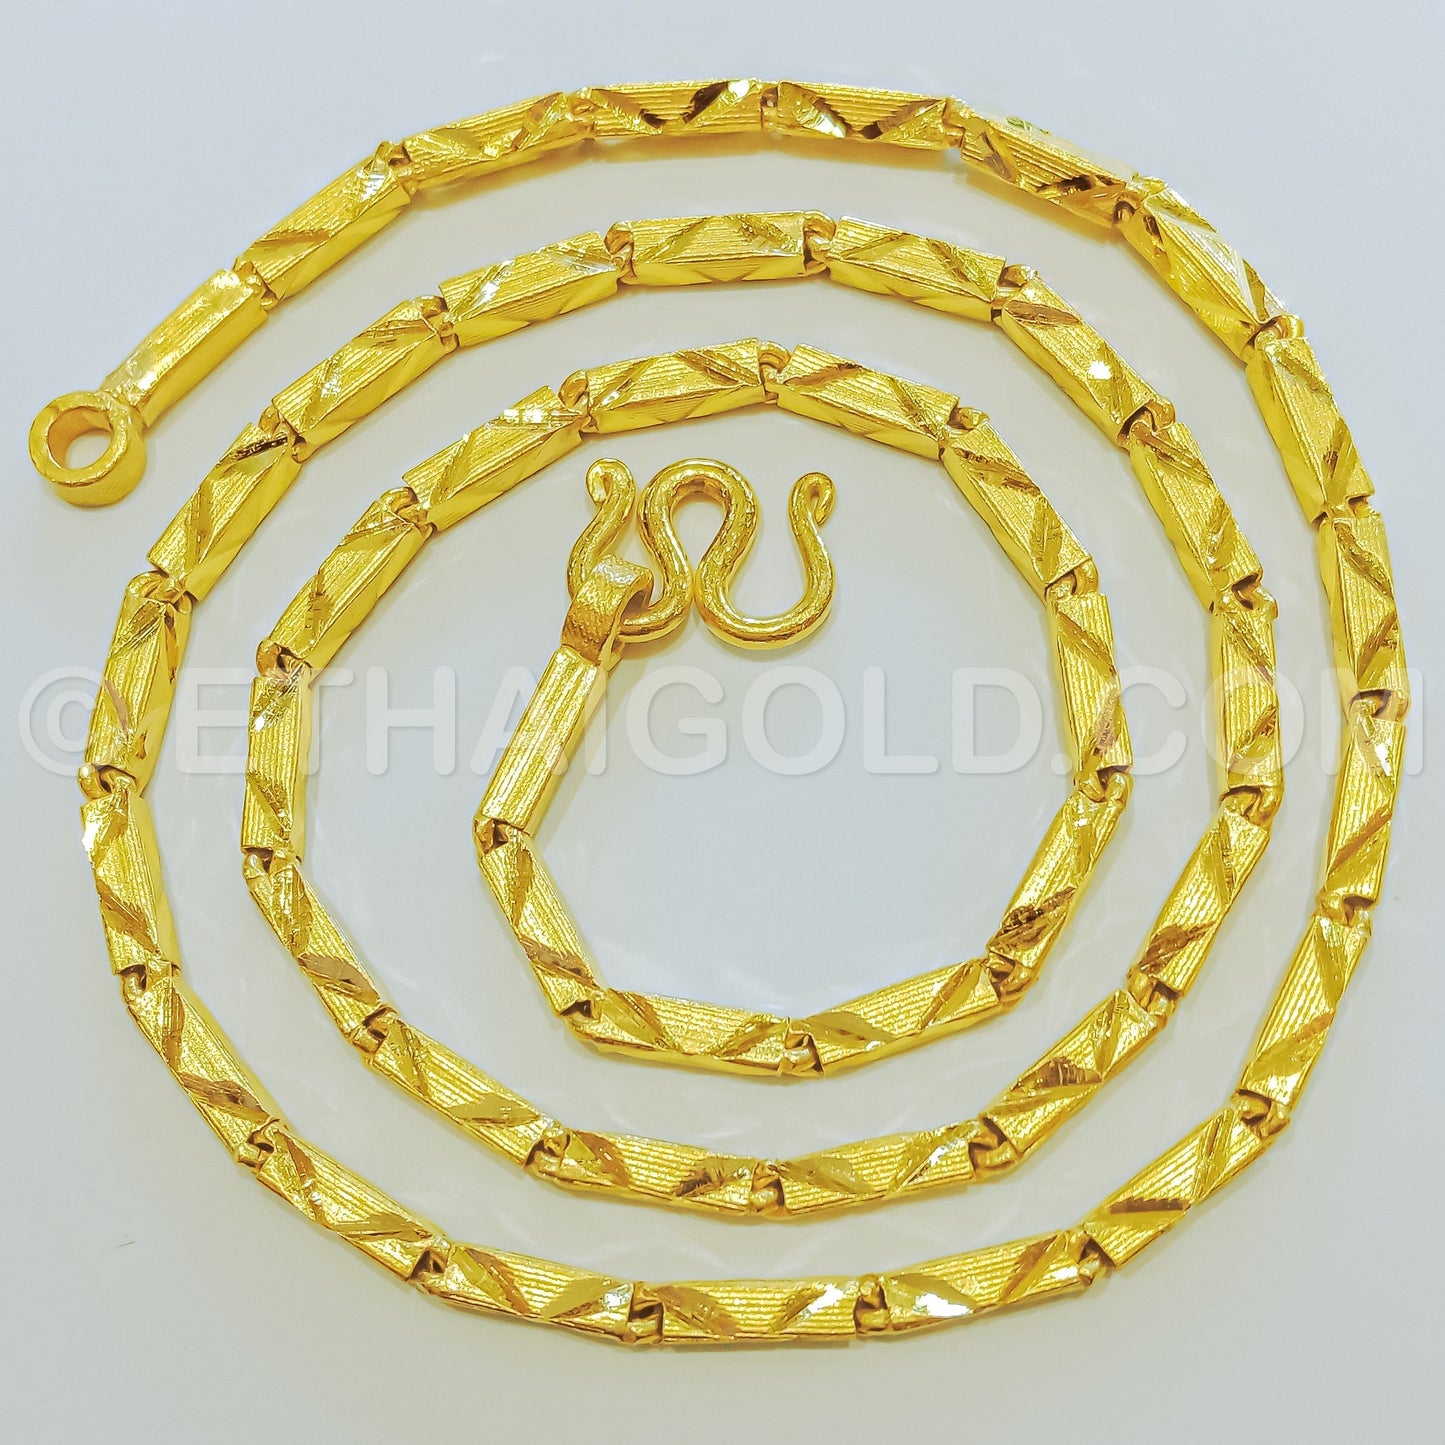 3 BAHT MATTE DIAMOND-CUT SOLID SQUARE BARREL CHAIN NECKLACE IN 23K GOLD (ID: N2003B)